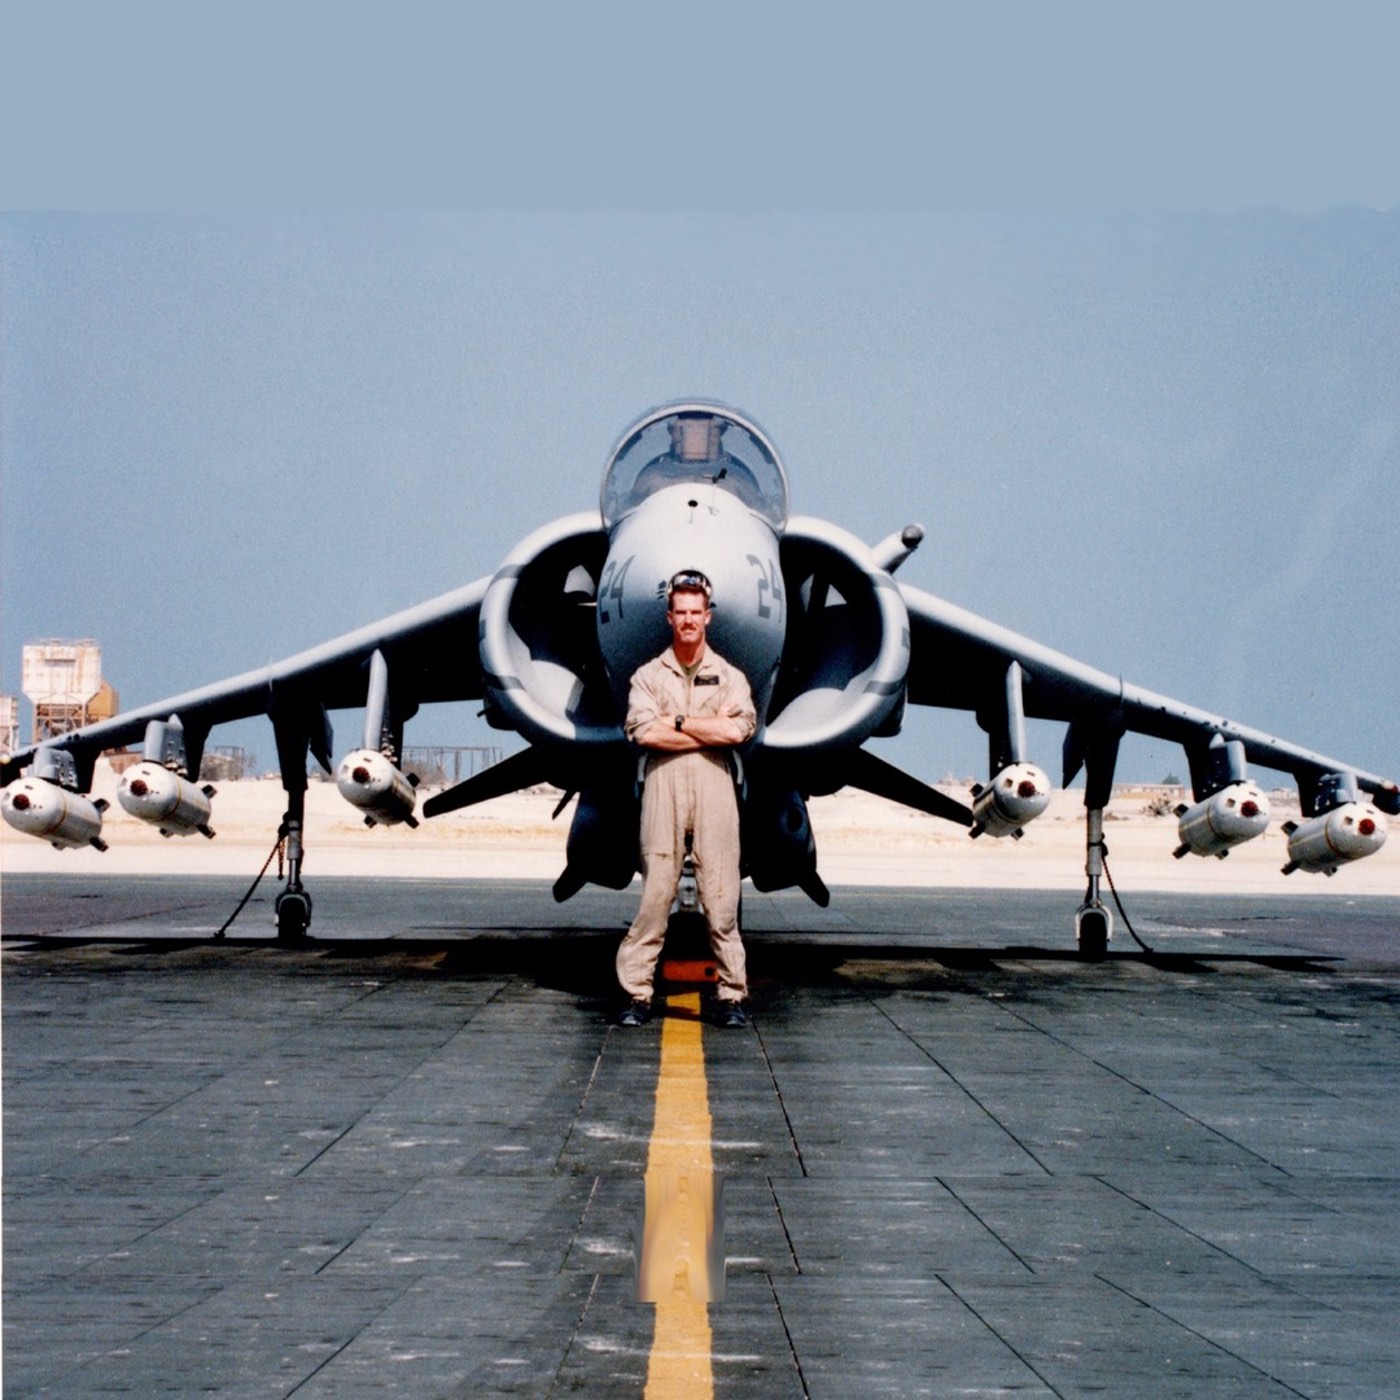 Vapor in front of a Harrier loaded with Mk-20 "Rockeyes"